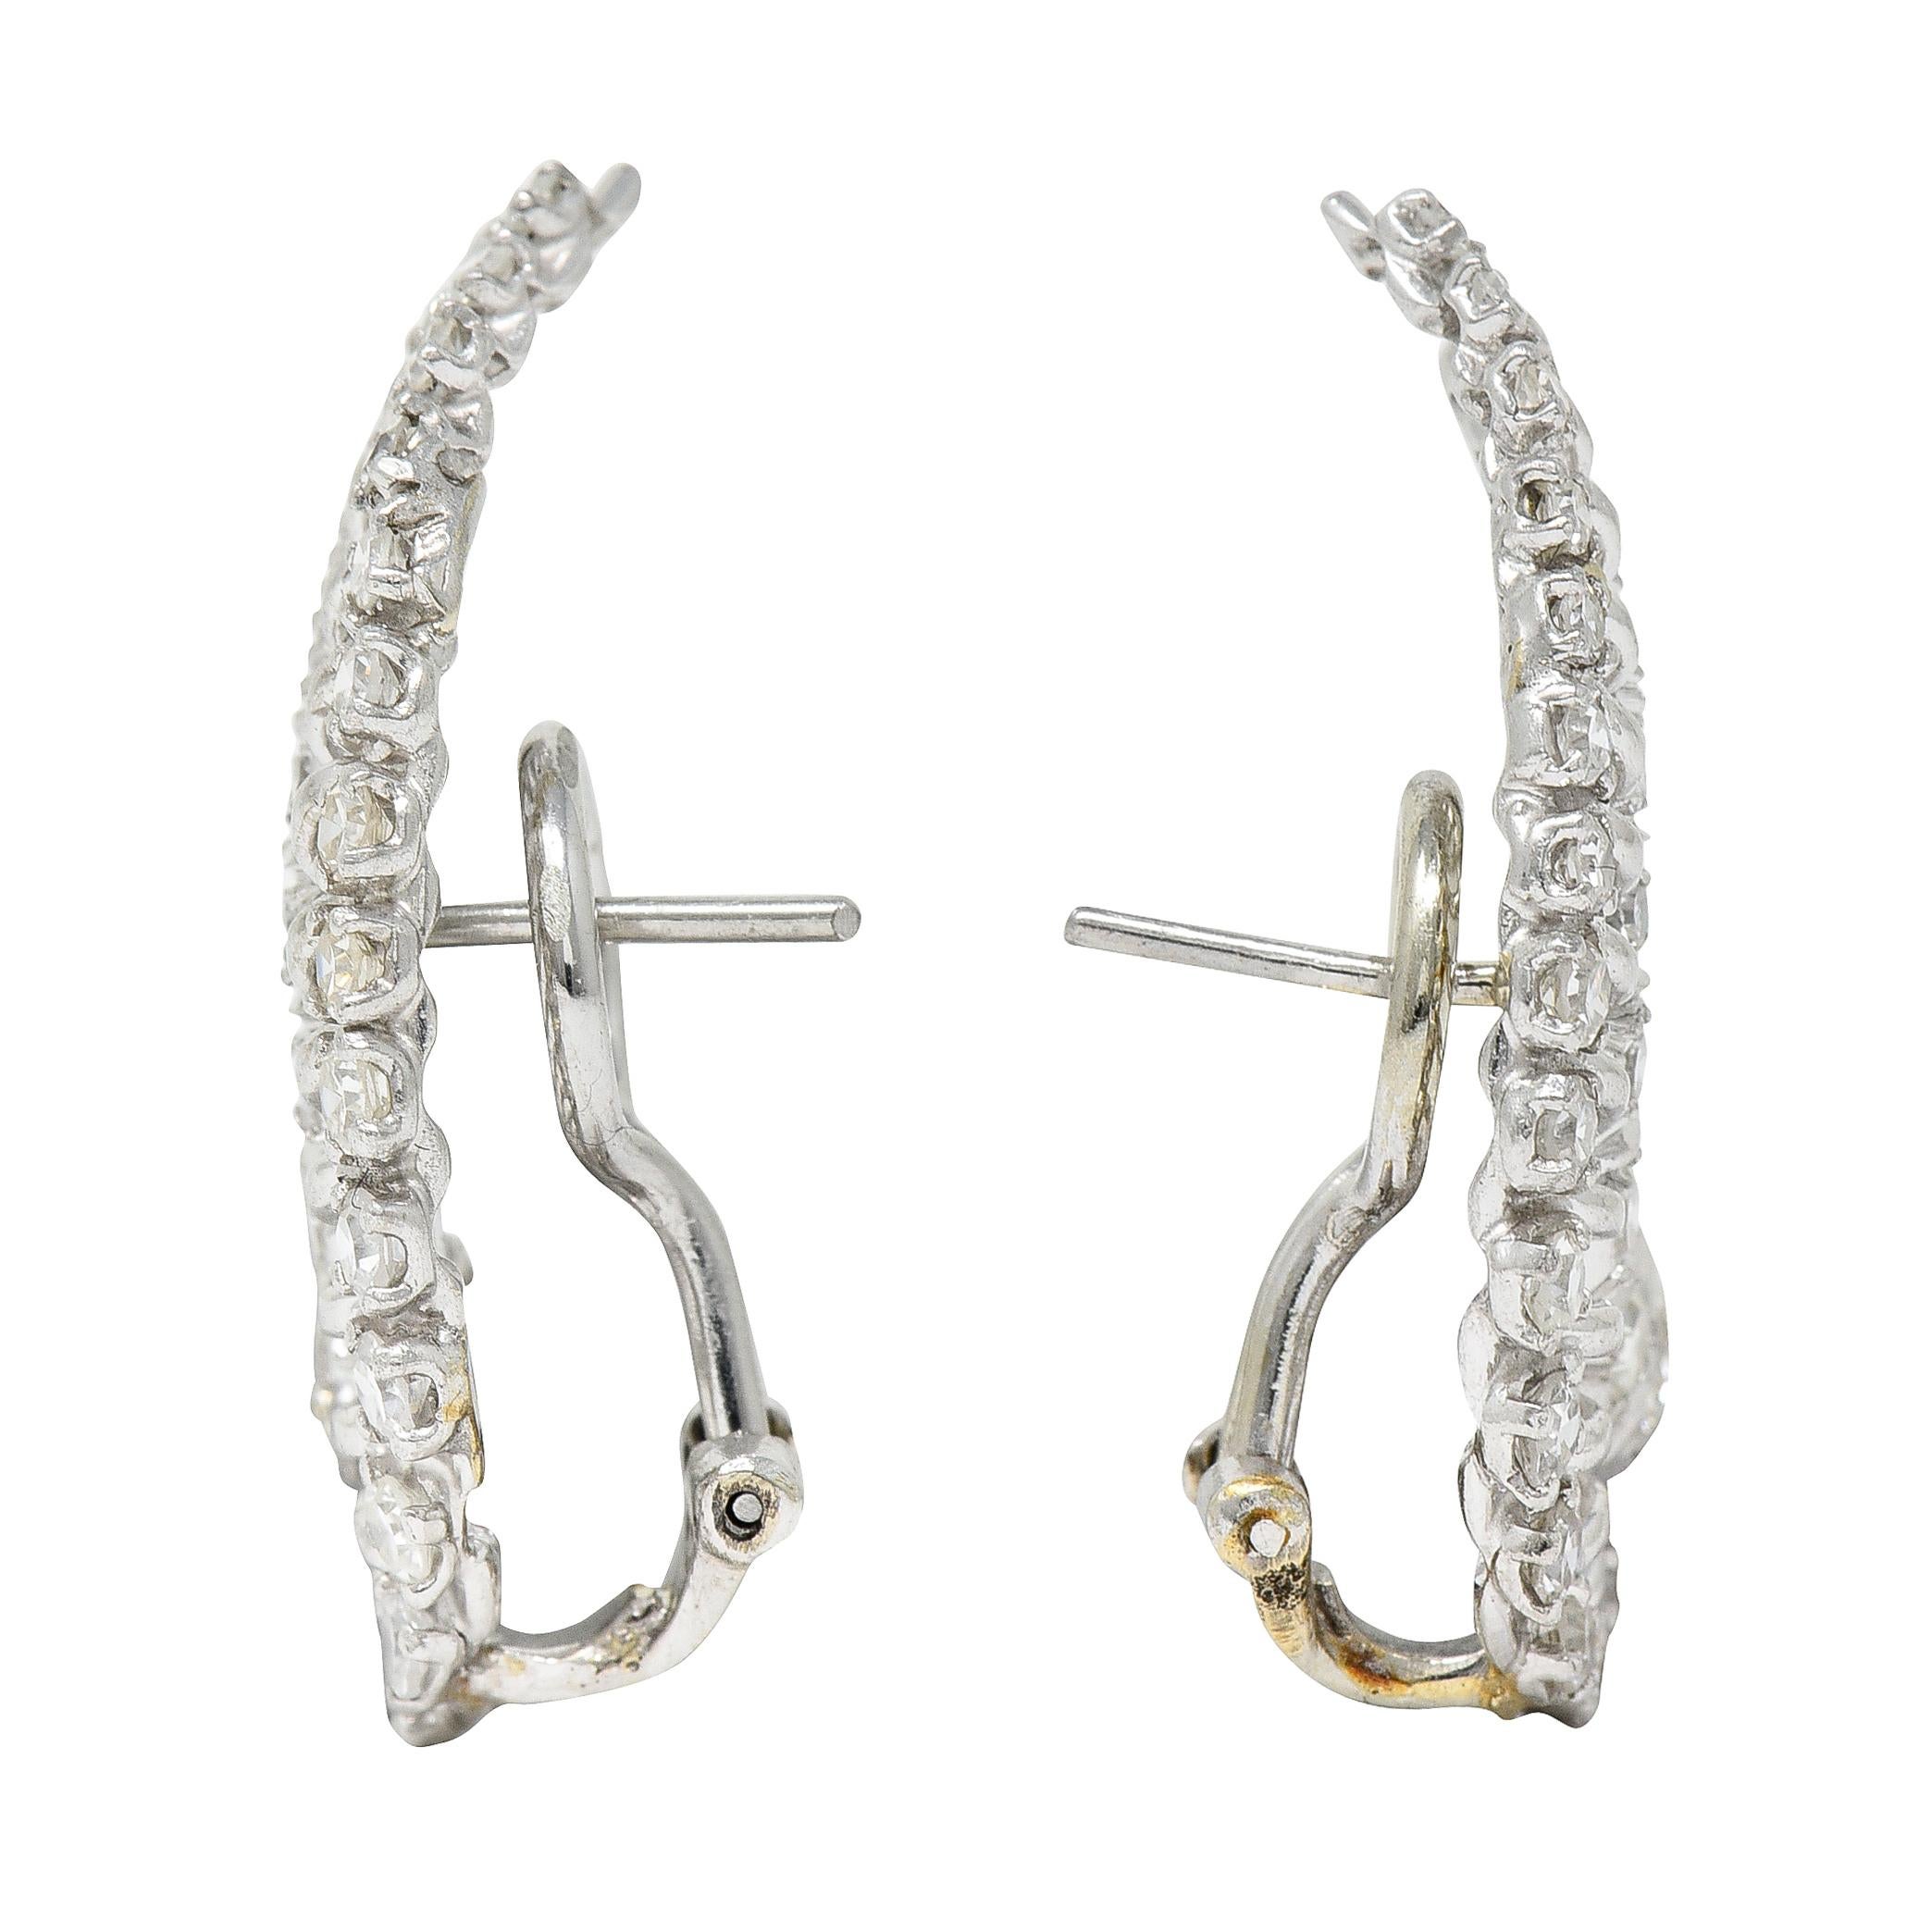 Earrings are designed as curved striated forms that crawl up the ear

Set throughout by single and transitional cut diamonds

Weighing in total approximately 1.50 carats - H/I color with VS clarity

Completed by posts and hinged omega backs - tested